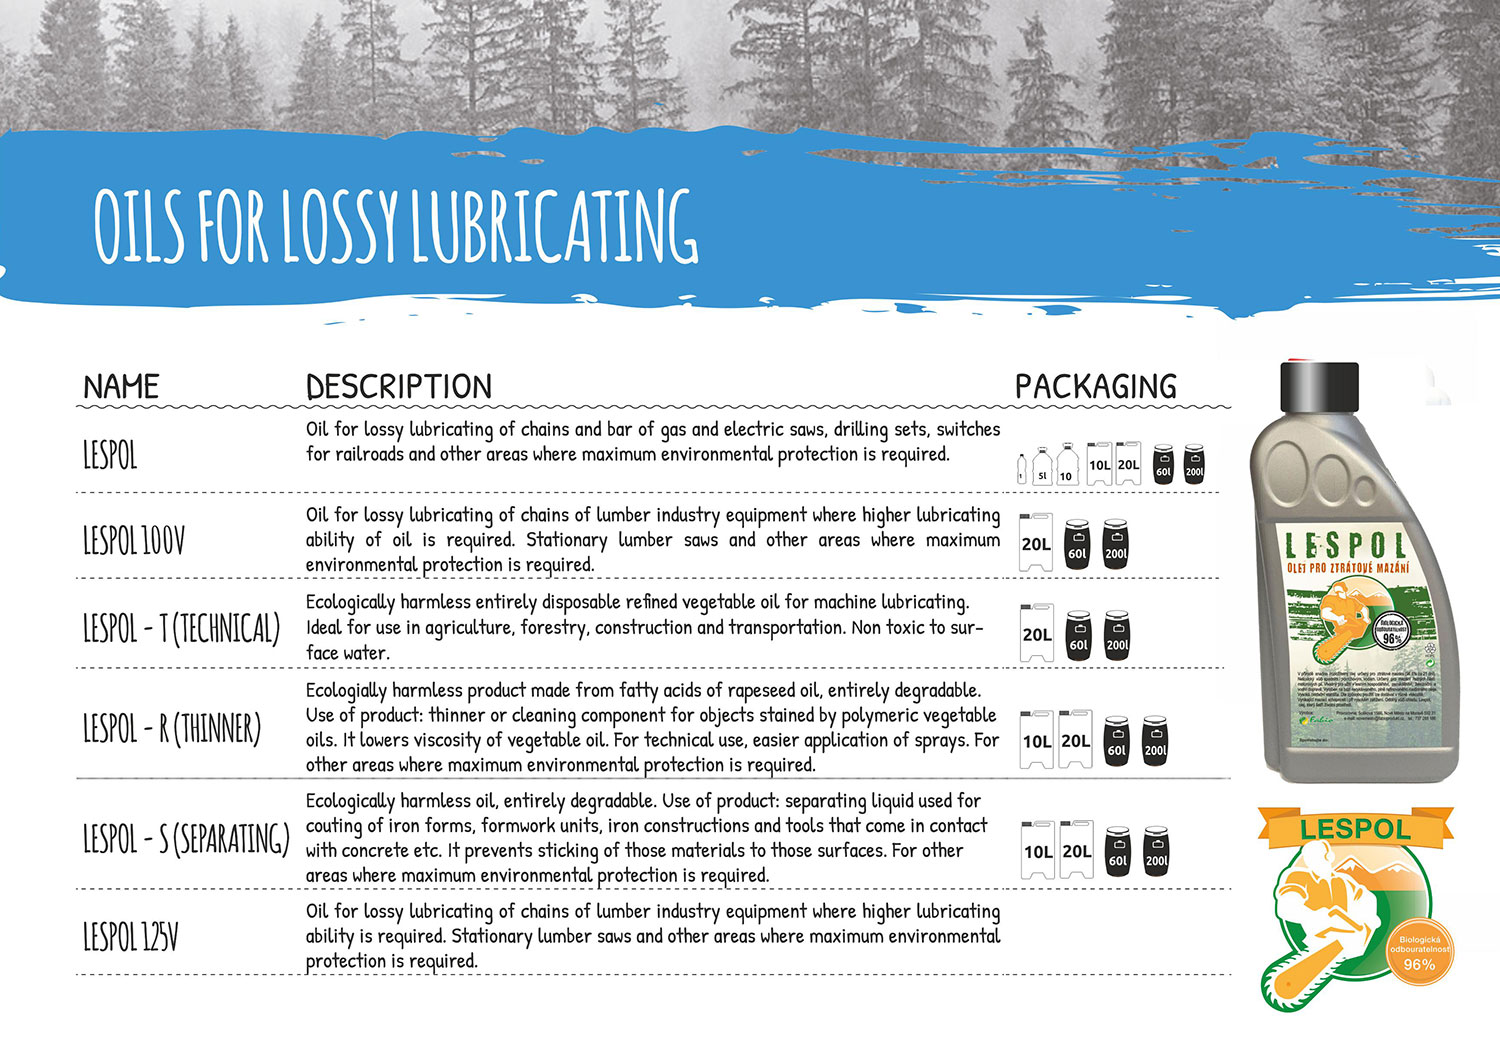 Oils for lossy lubricating